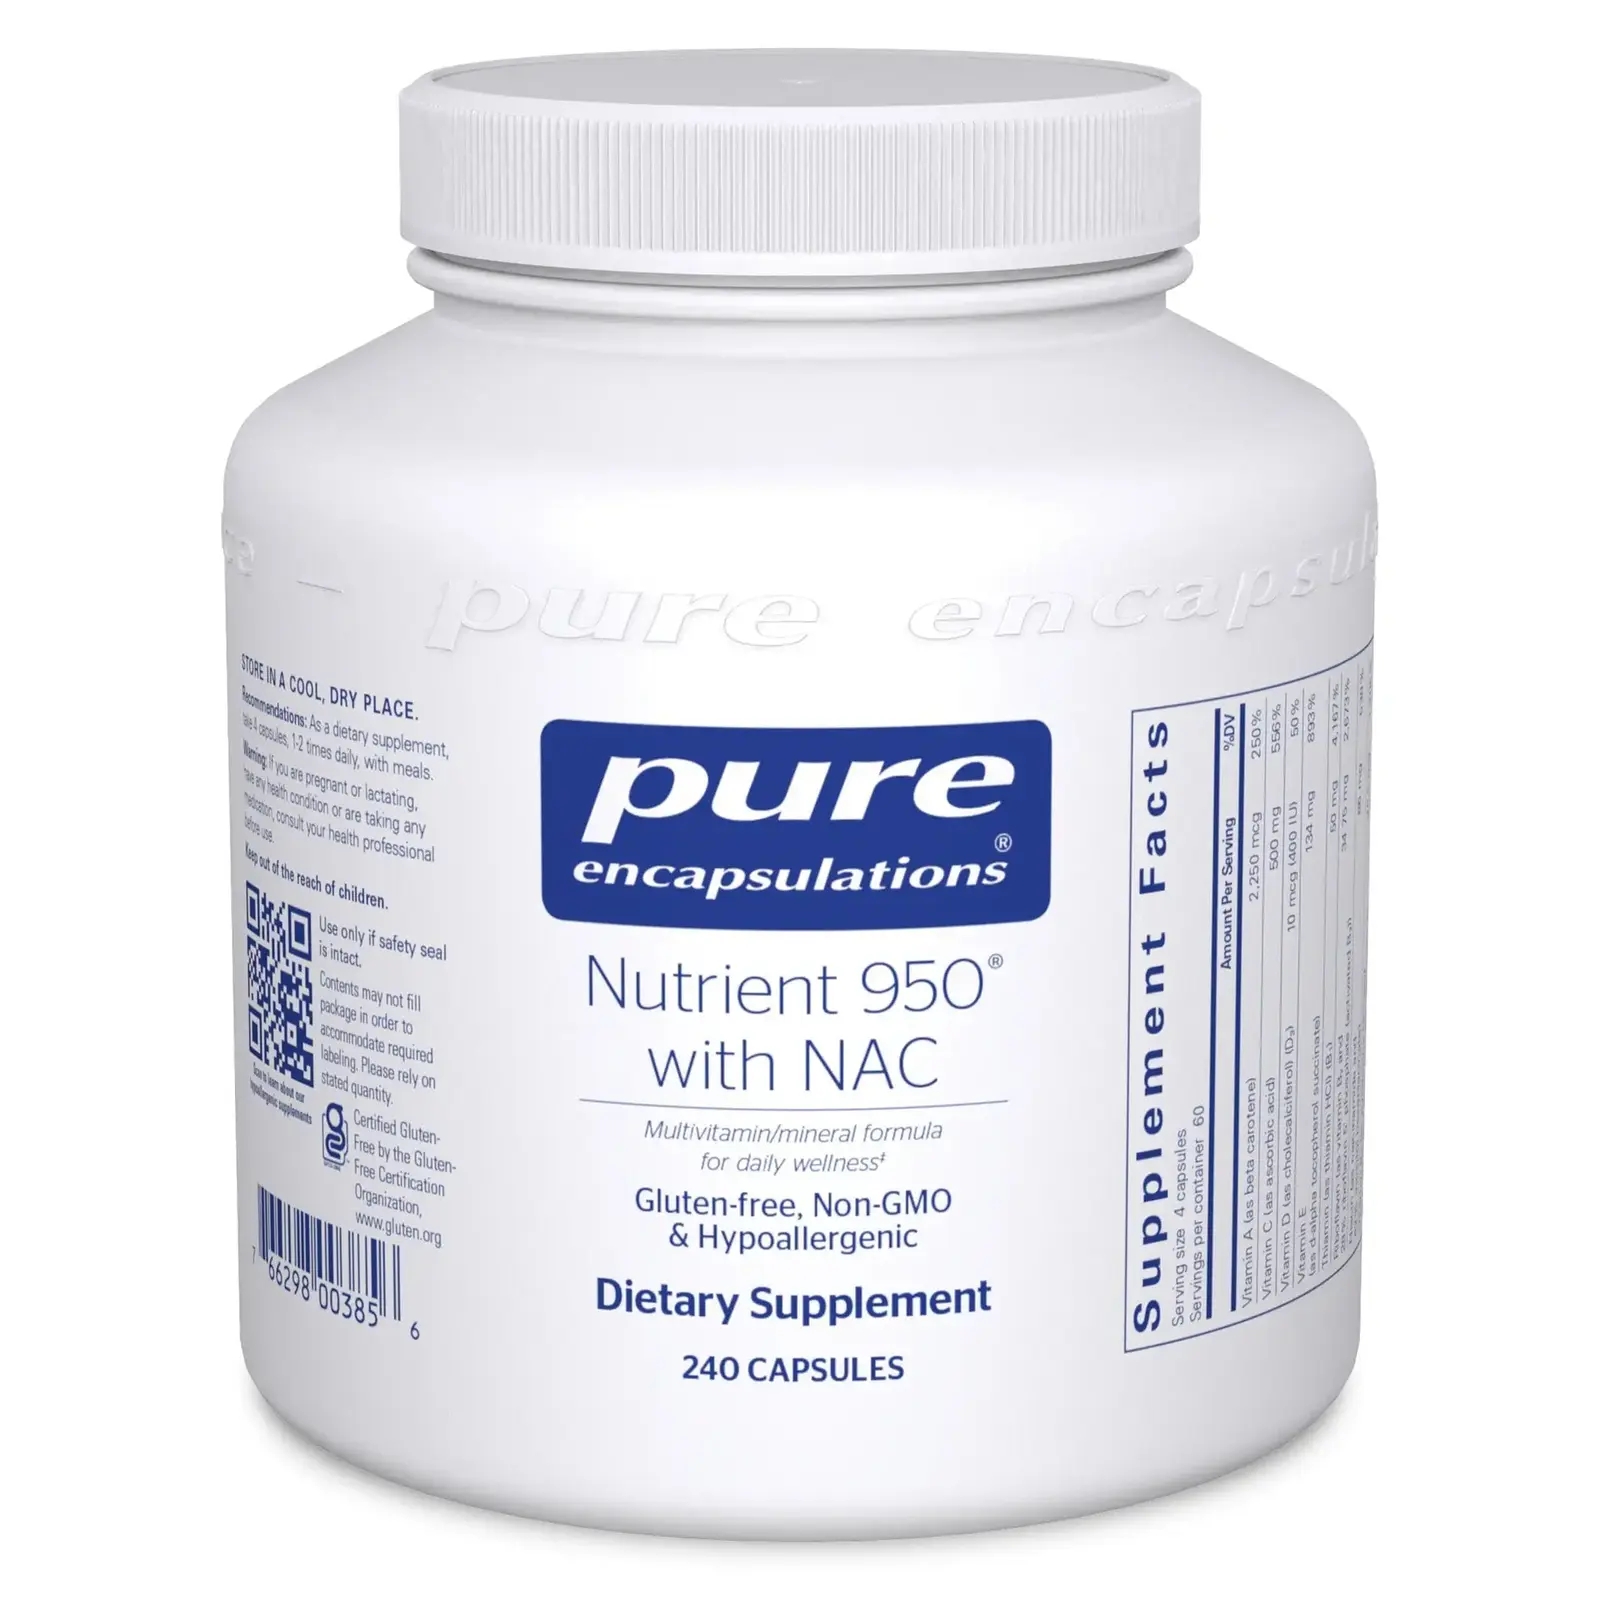 Nutrient 950® with NAC